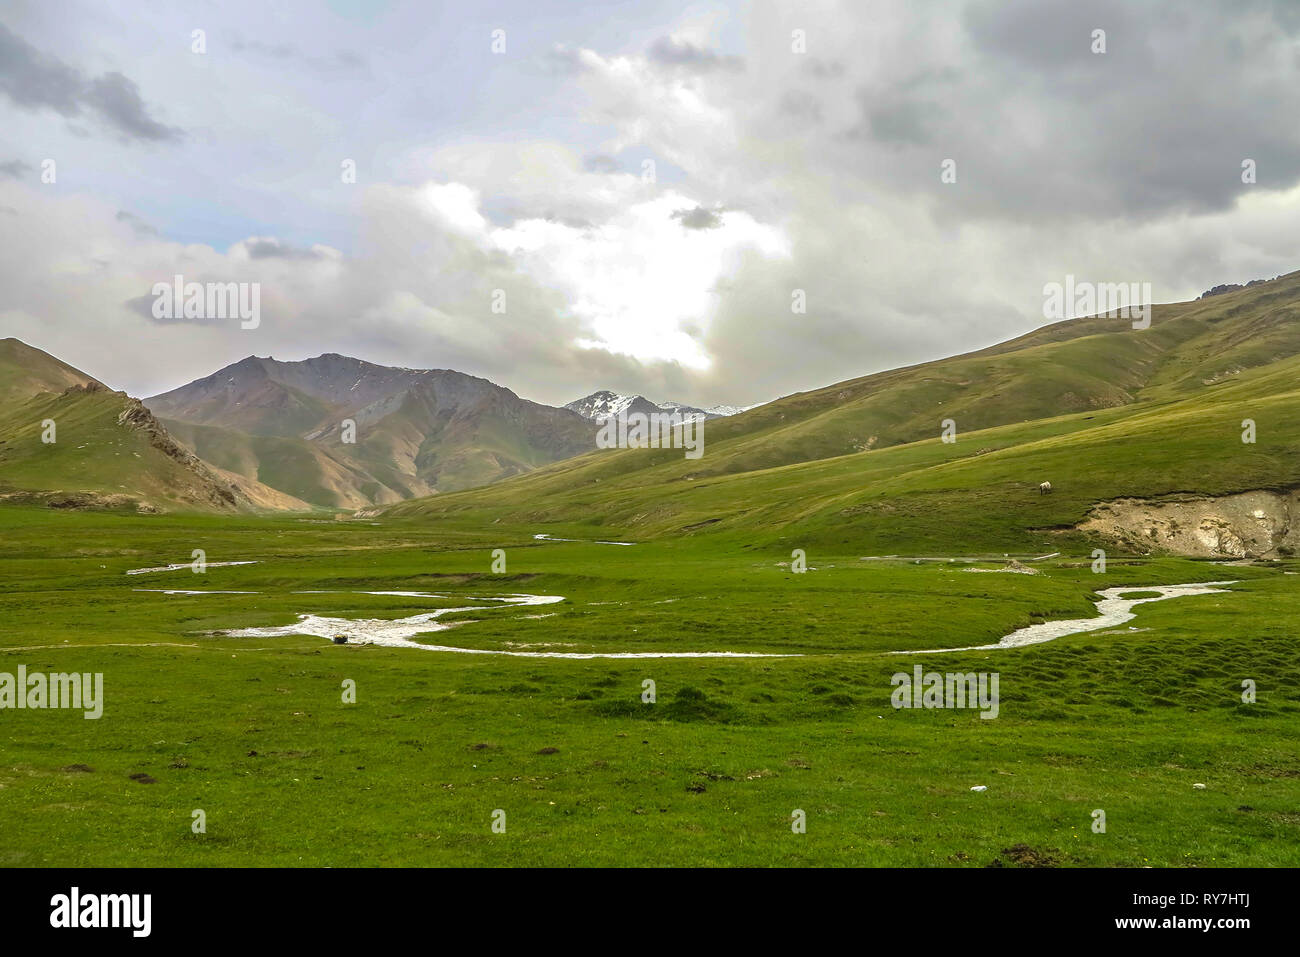 Tash Rabat Caravanserai Landscape with Snow Capped At Bashy Too Mountain Range and River Stock Photo